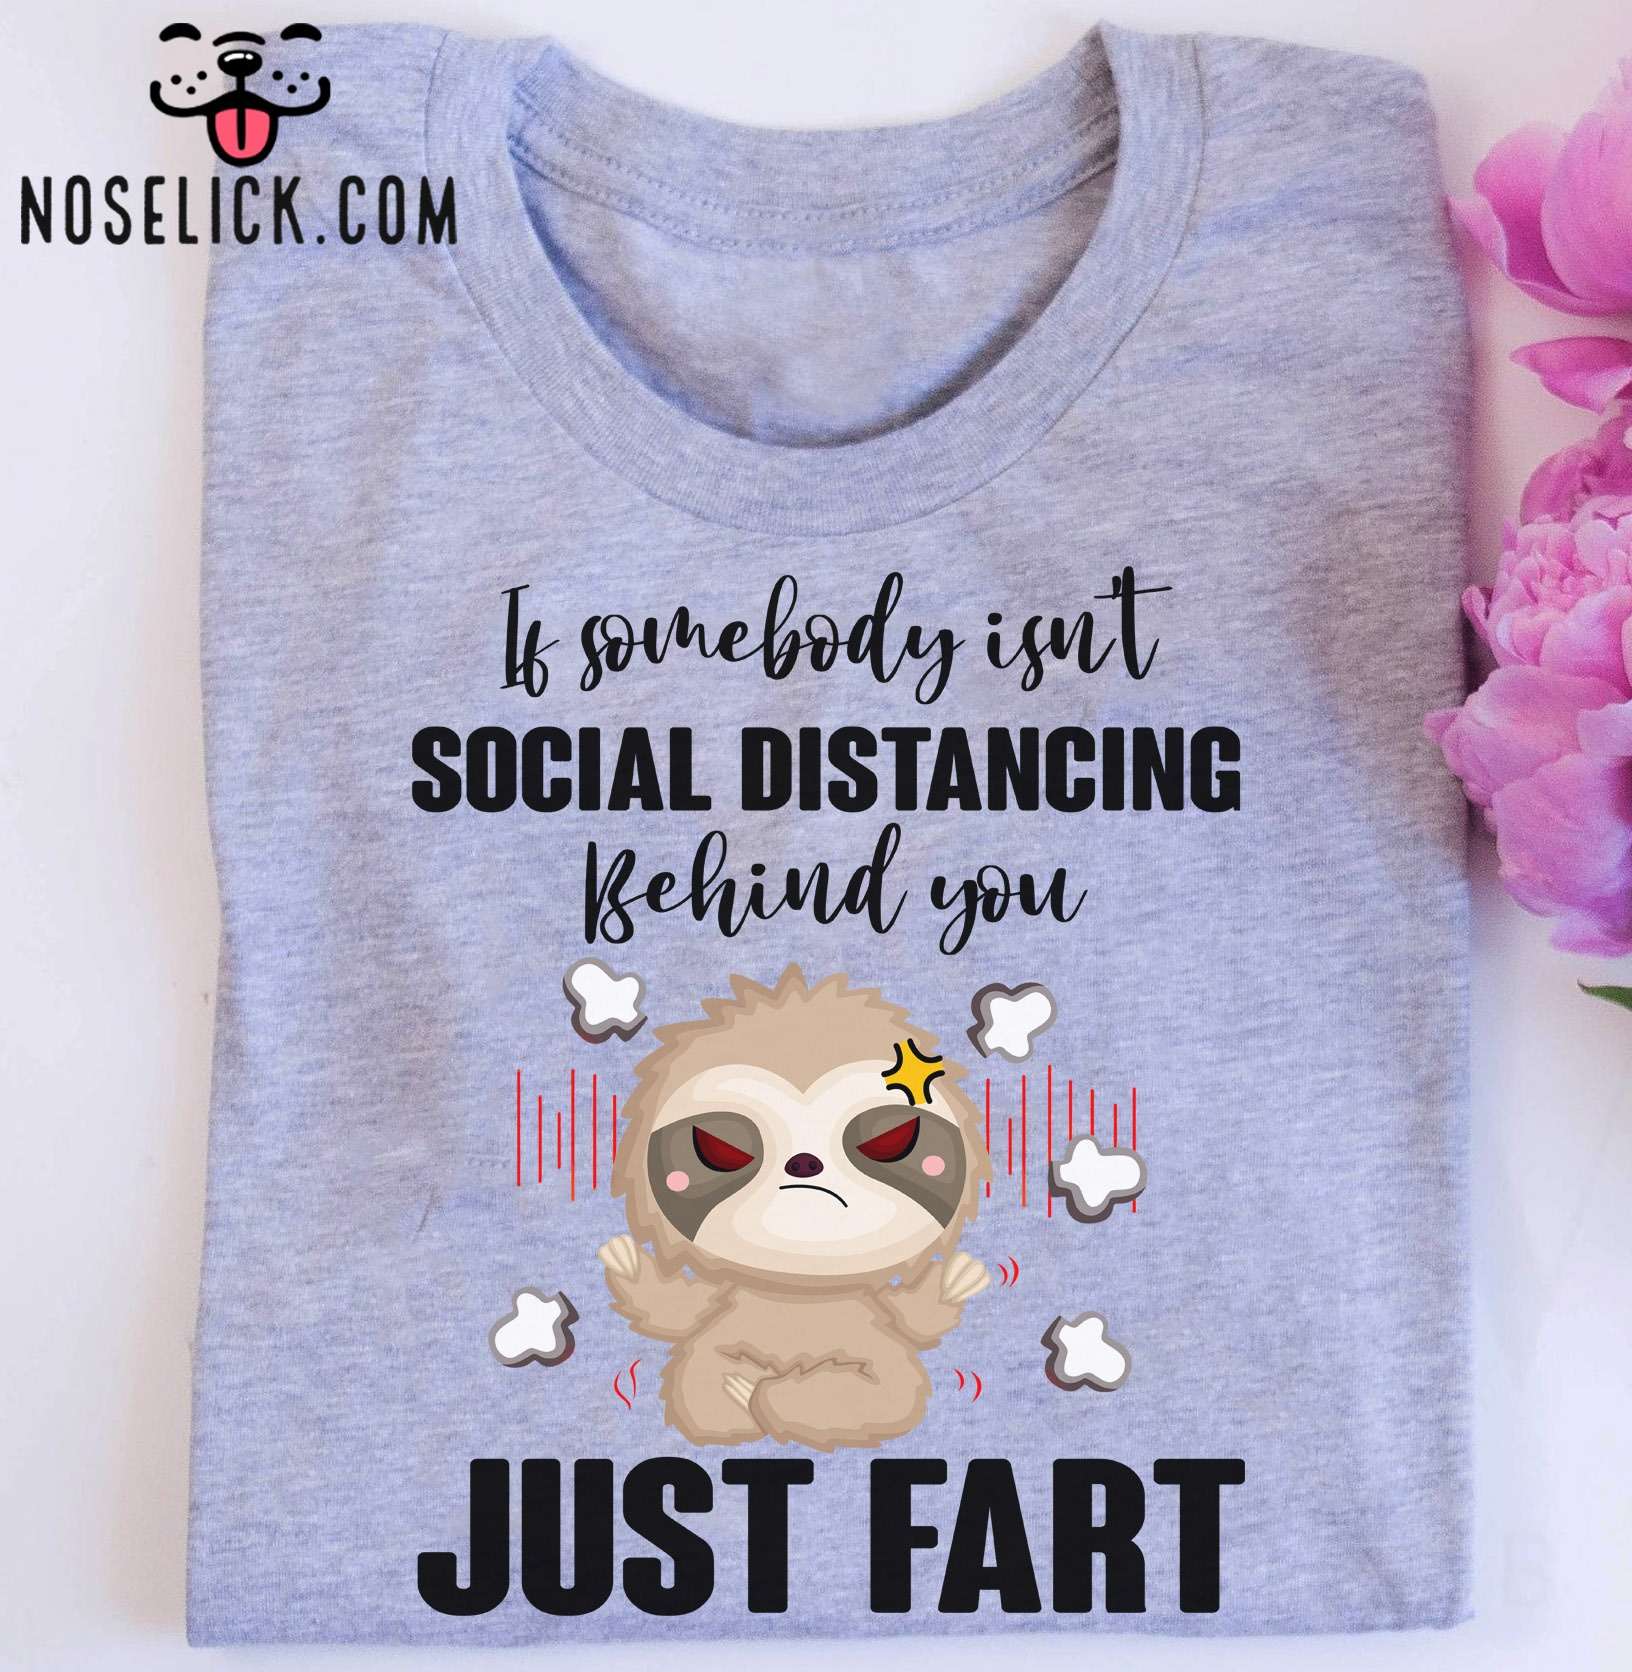 Angry Sloth - If somebody isnt social distancing behind you just fart